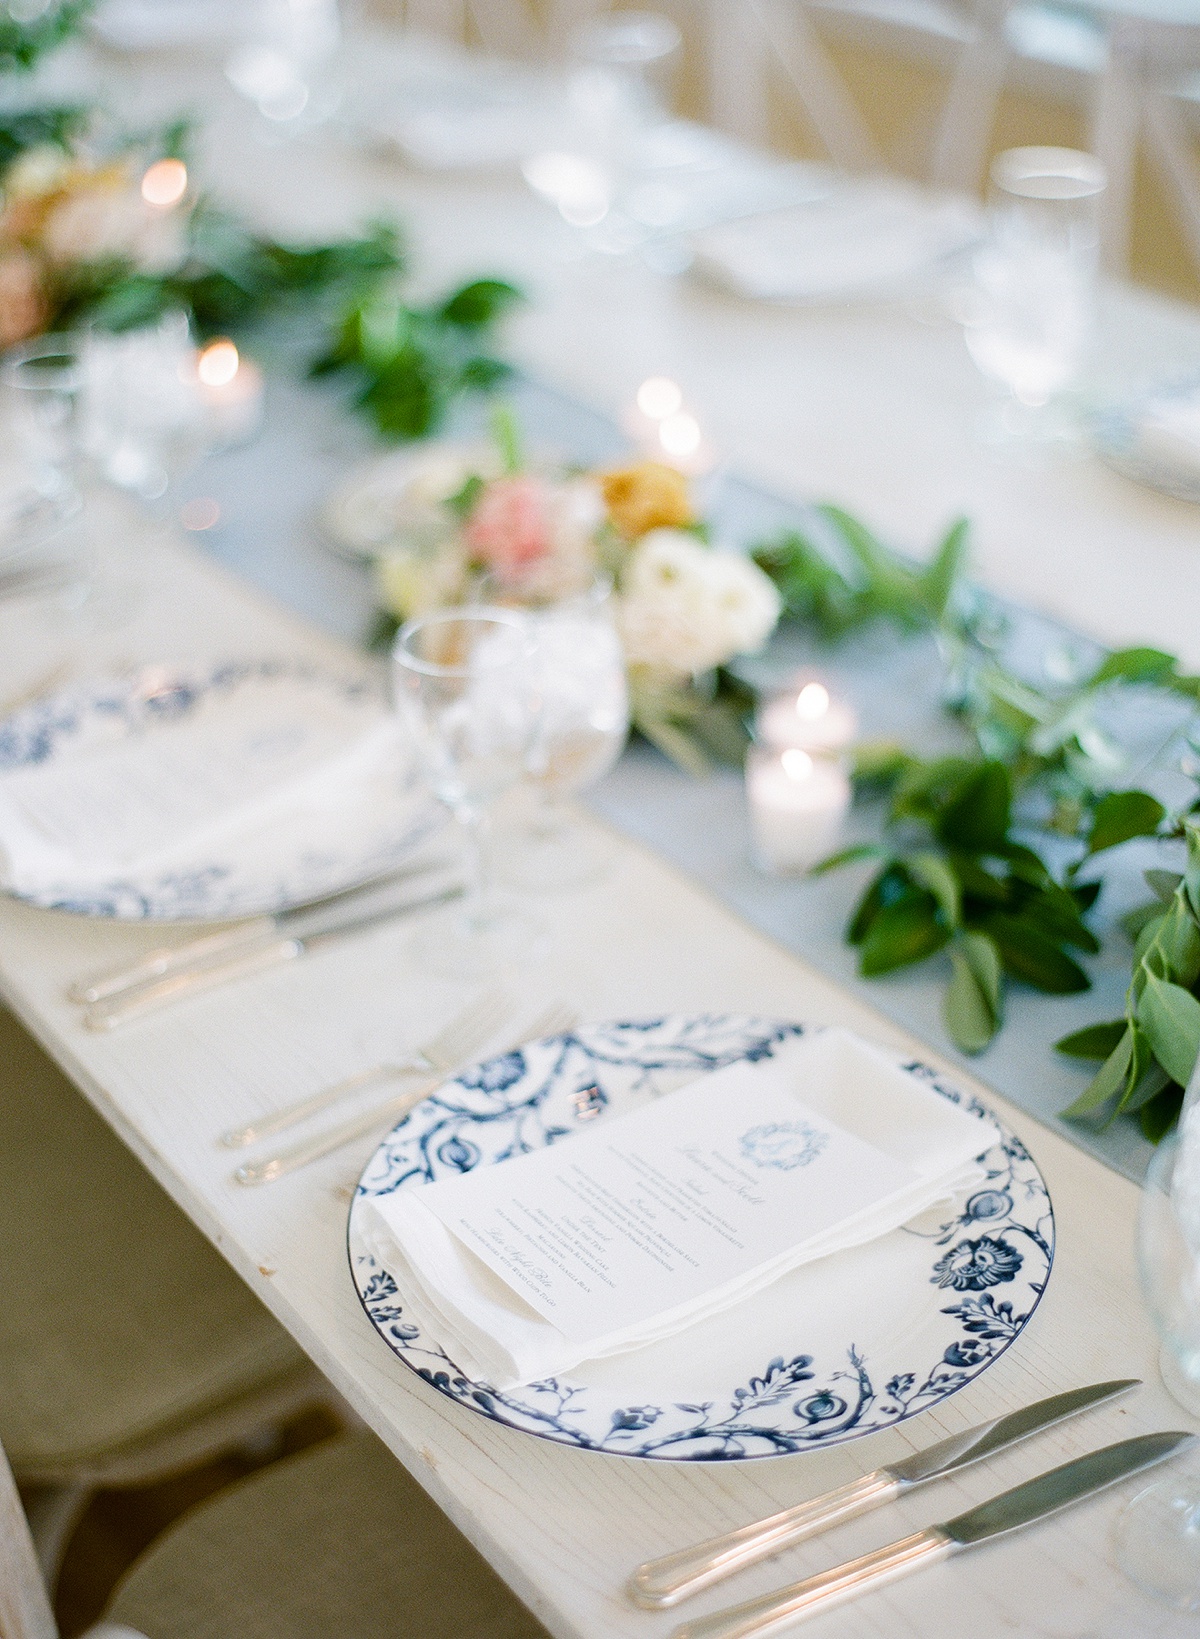 Ways to enhance the wedding guest experience from Jessica Dum Wedding Coordination